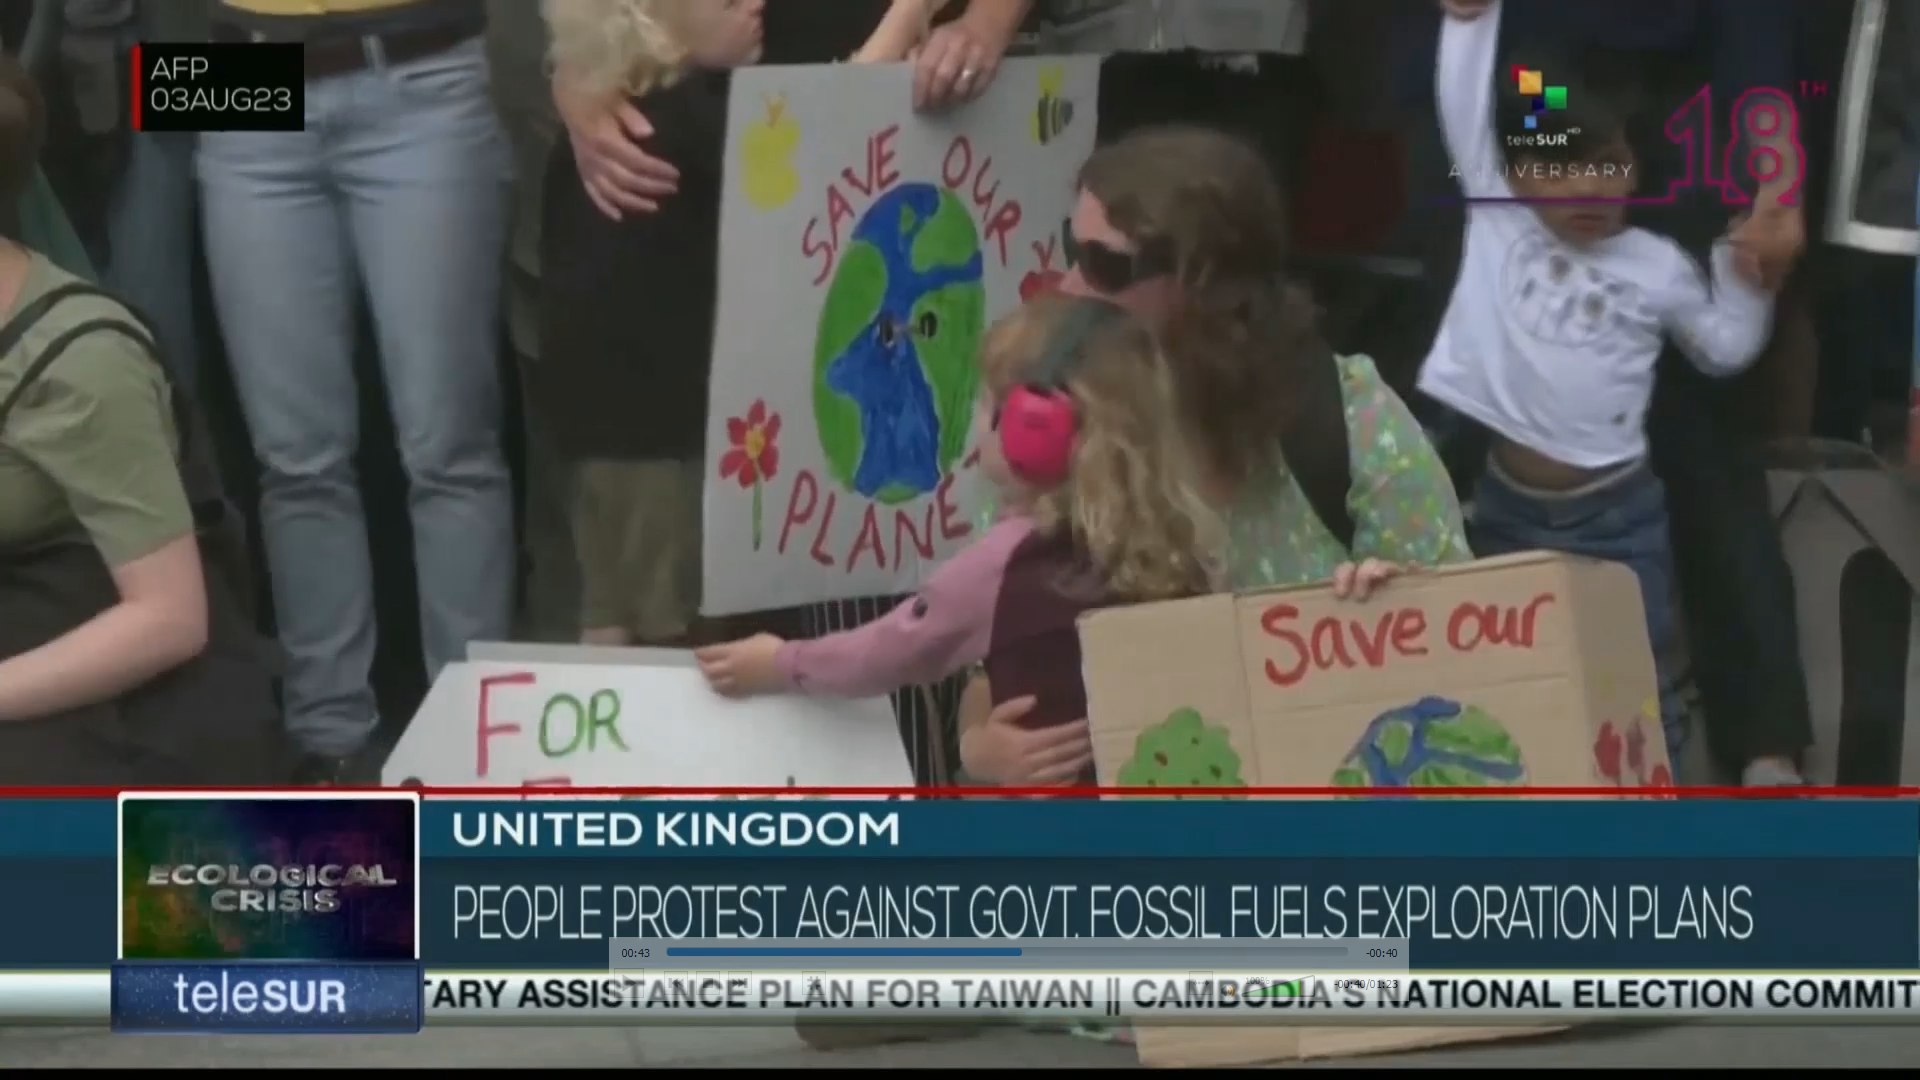 People protest against fossil fuels exploration plans in United Kingdom